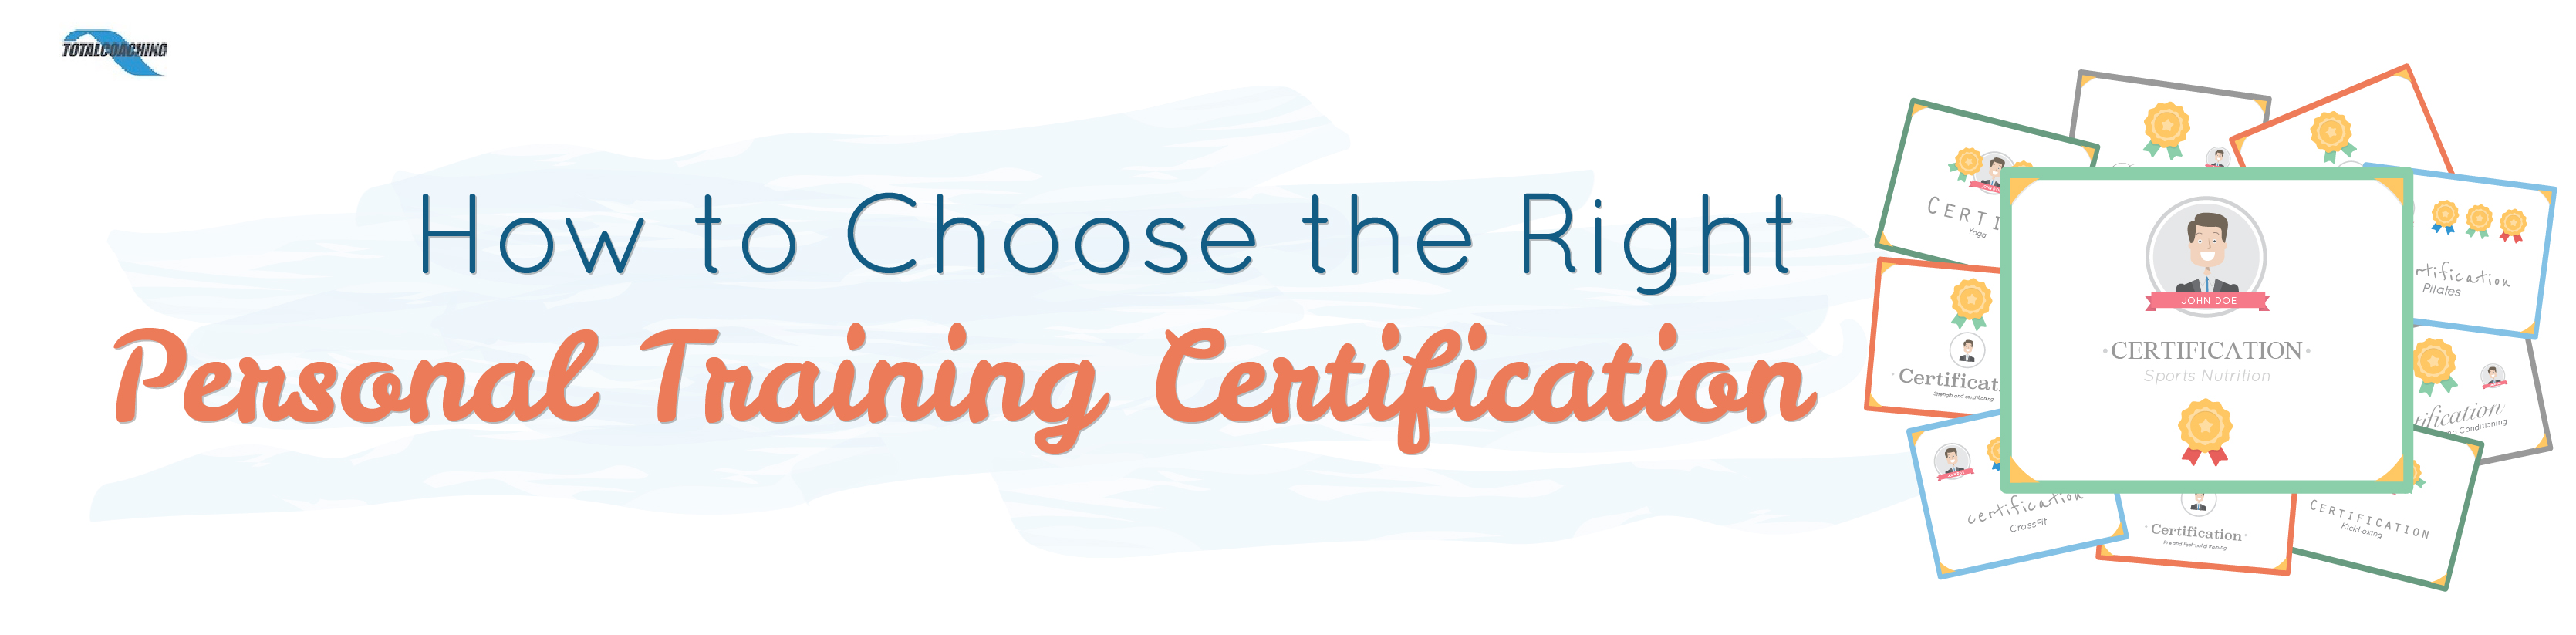 Choose the right PT certification